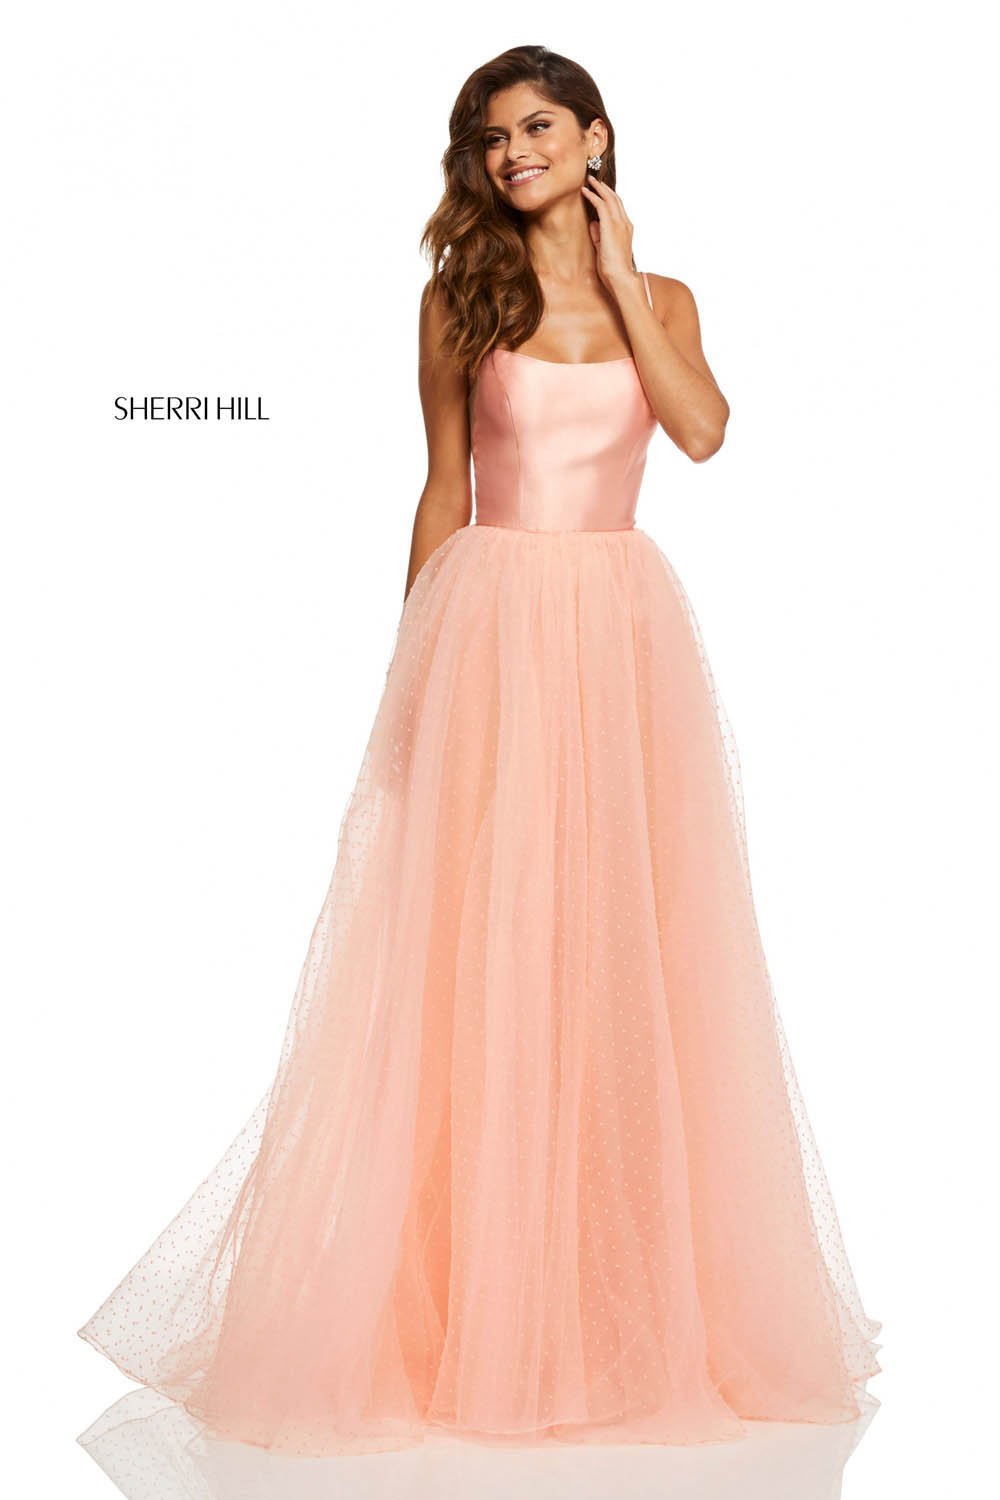 Sherri Hill 52639 dress images in these colors: Red, Ivory, Blush, Coral, Black, Navy.